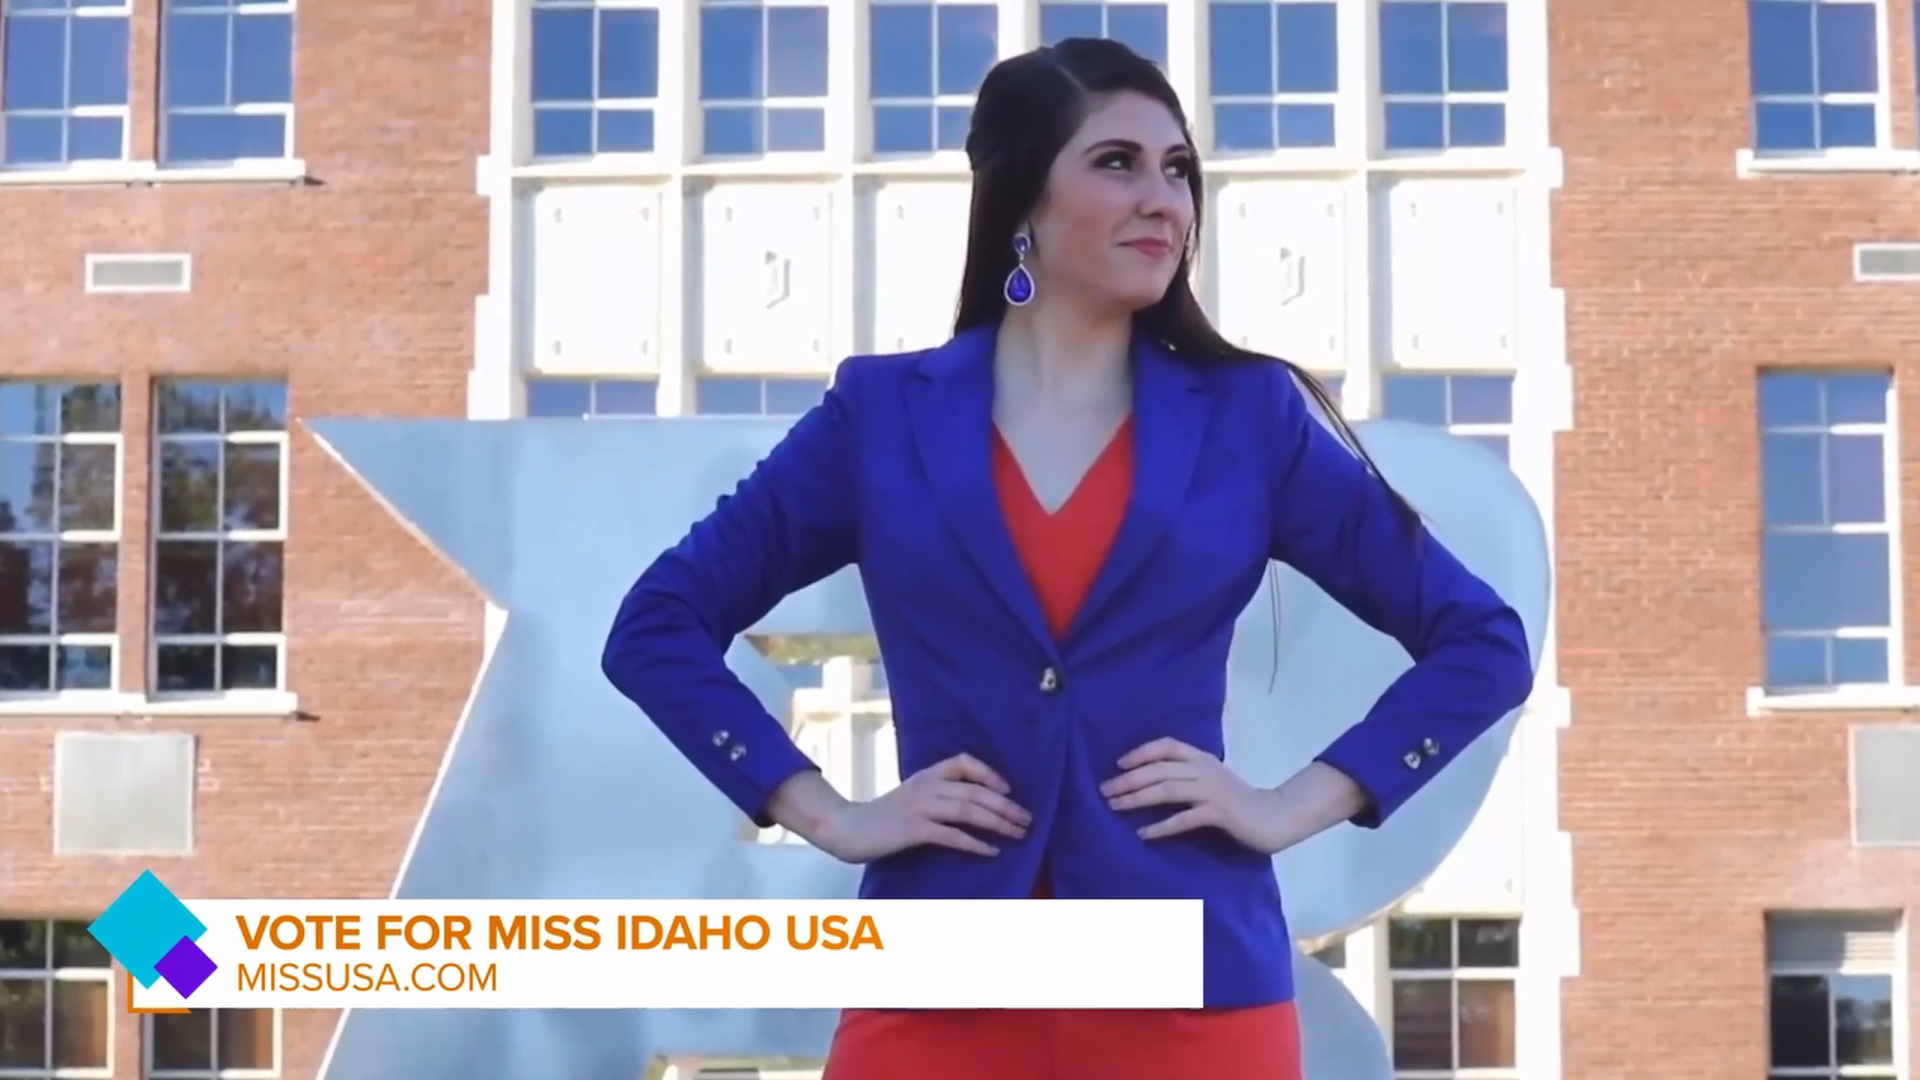 Katarina Schweitzer, Miss Idaho USA, describes what new things the Miss USA pageant will be bringing to this year's competition & how she's preparing for it.